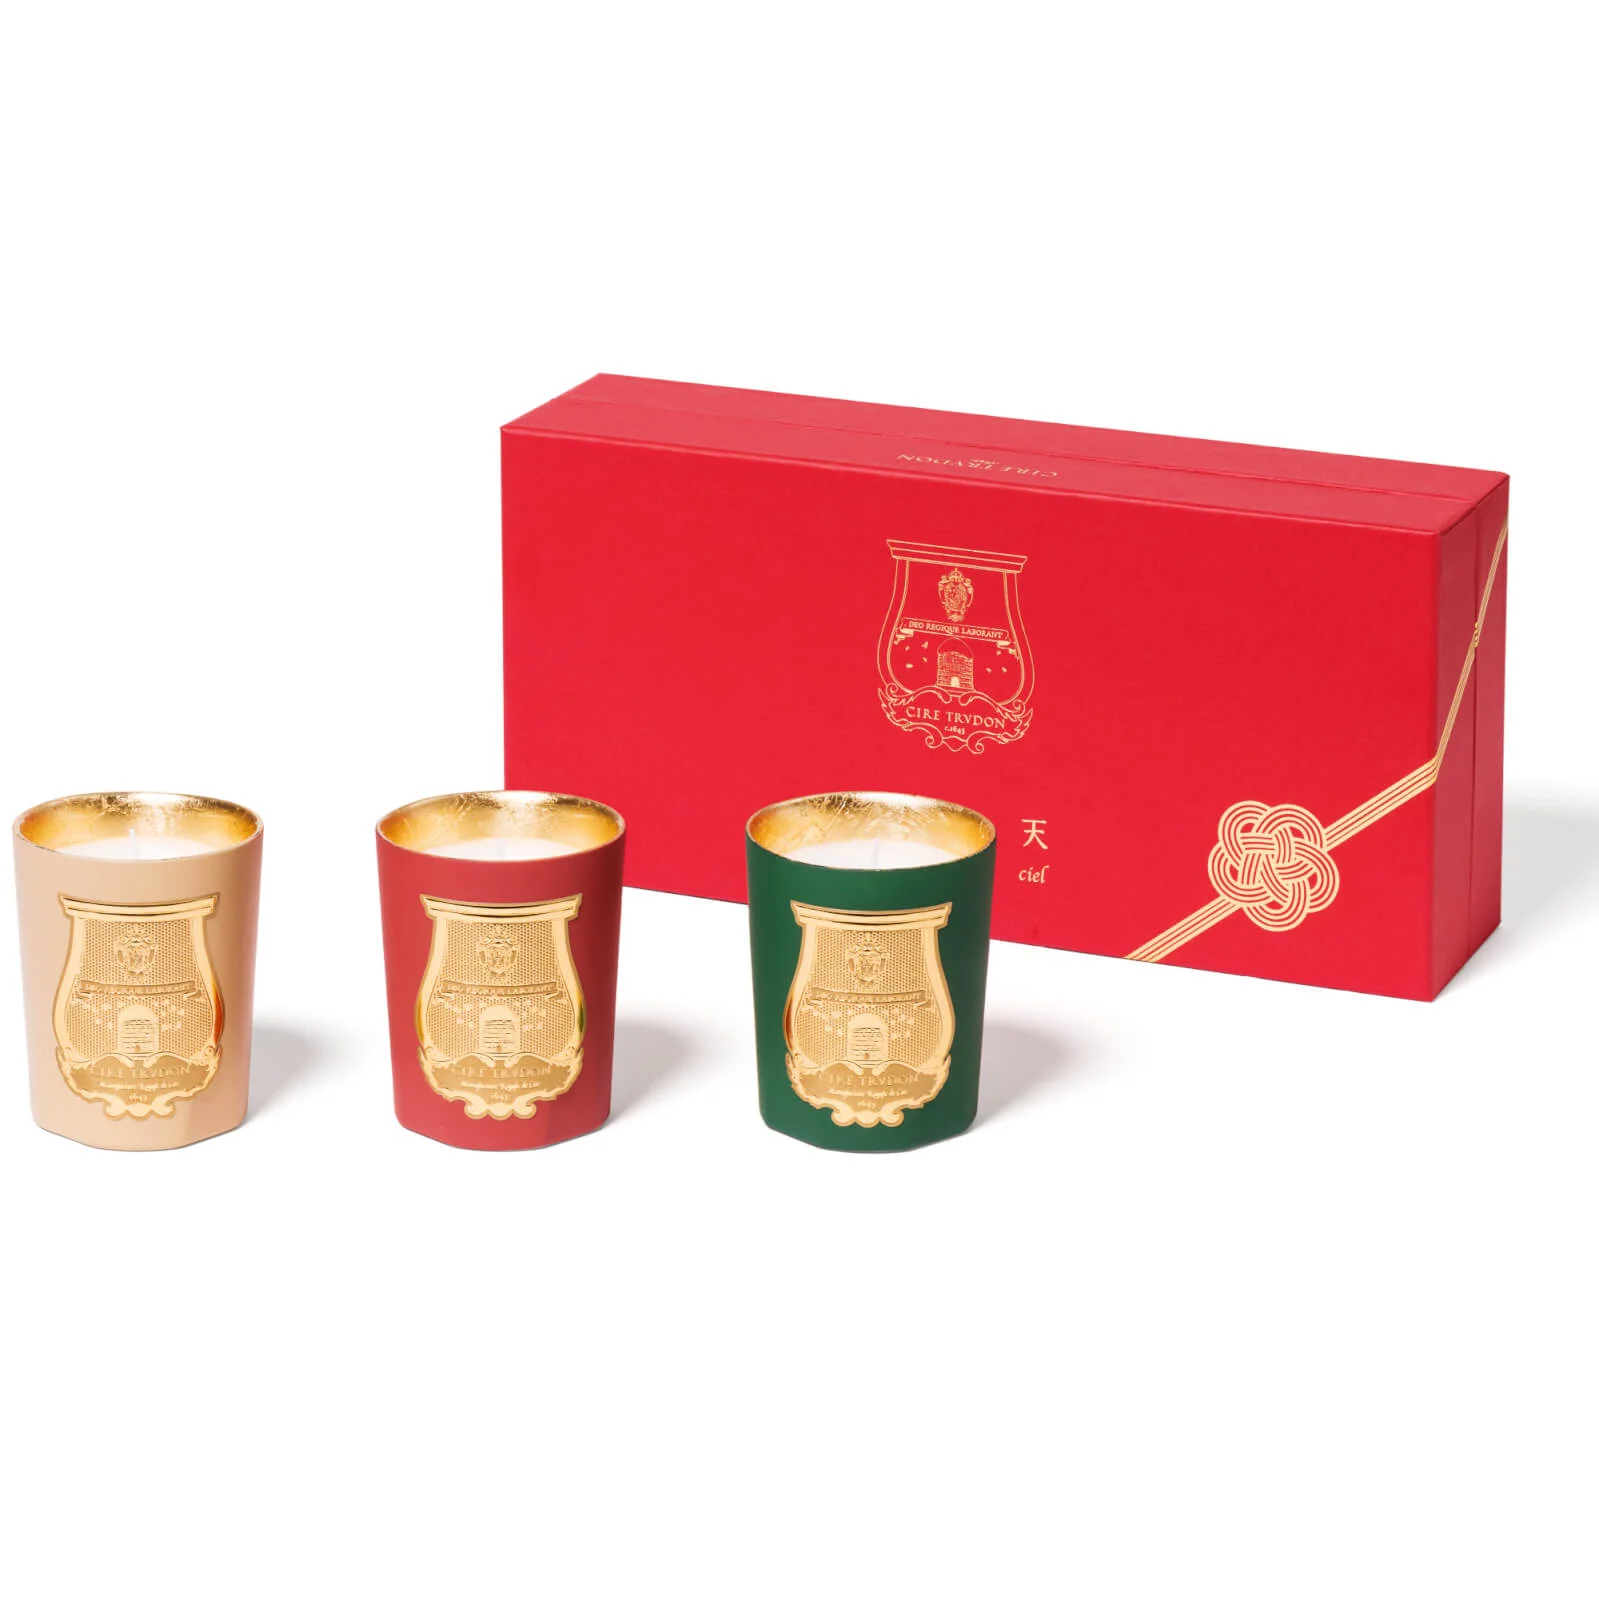 Cire Trudon Odeurs D'Hiver Set of 3 Candles Image 1